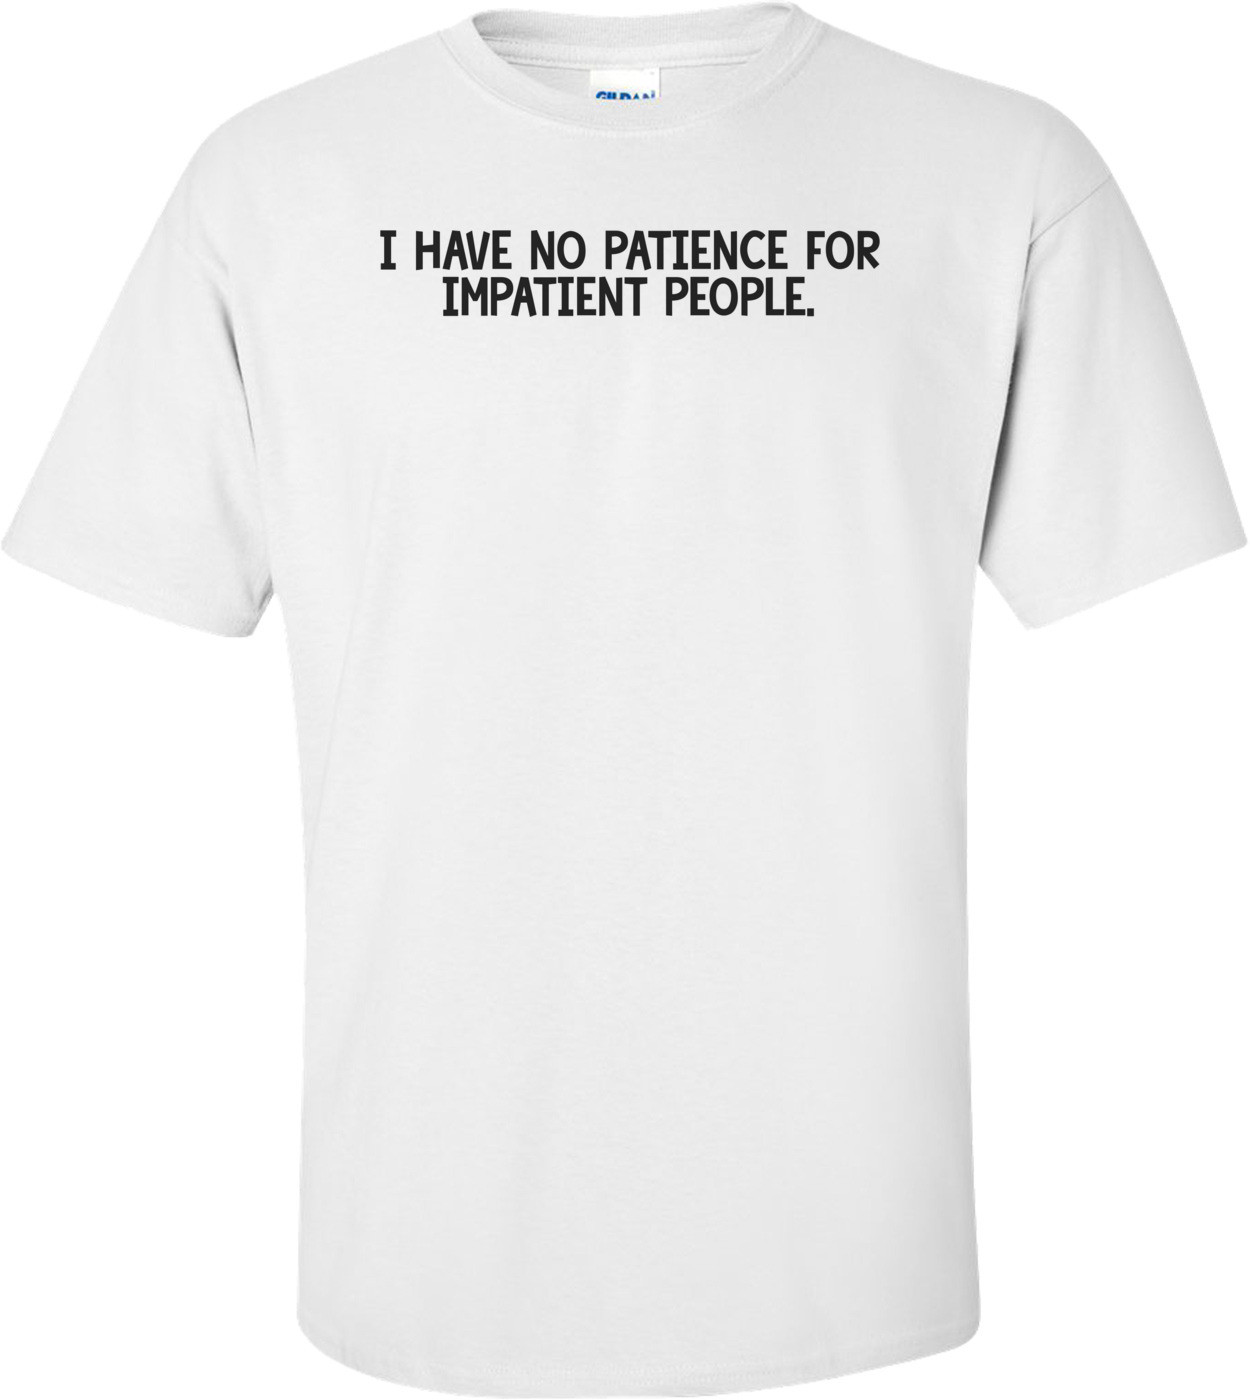 I have NO patience for impatient people. Shirt